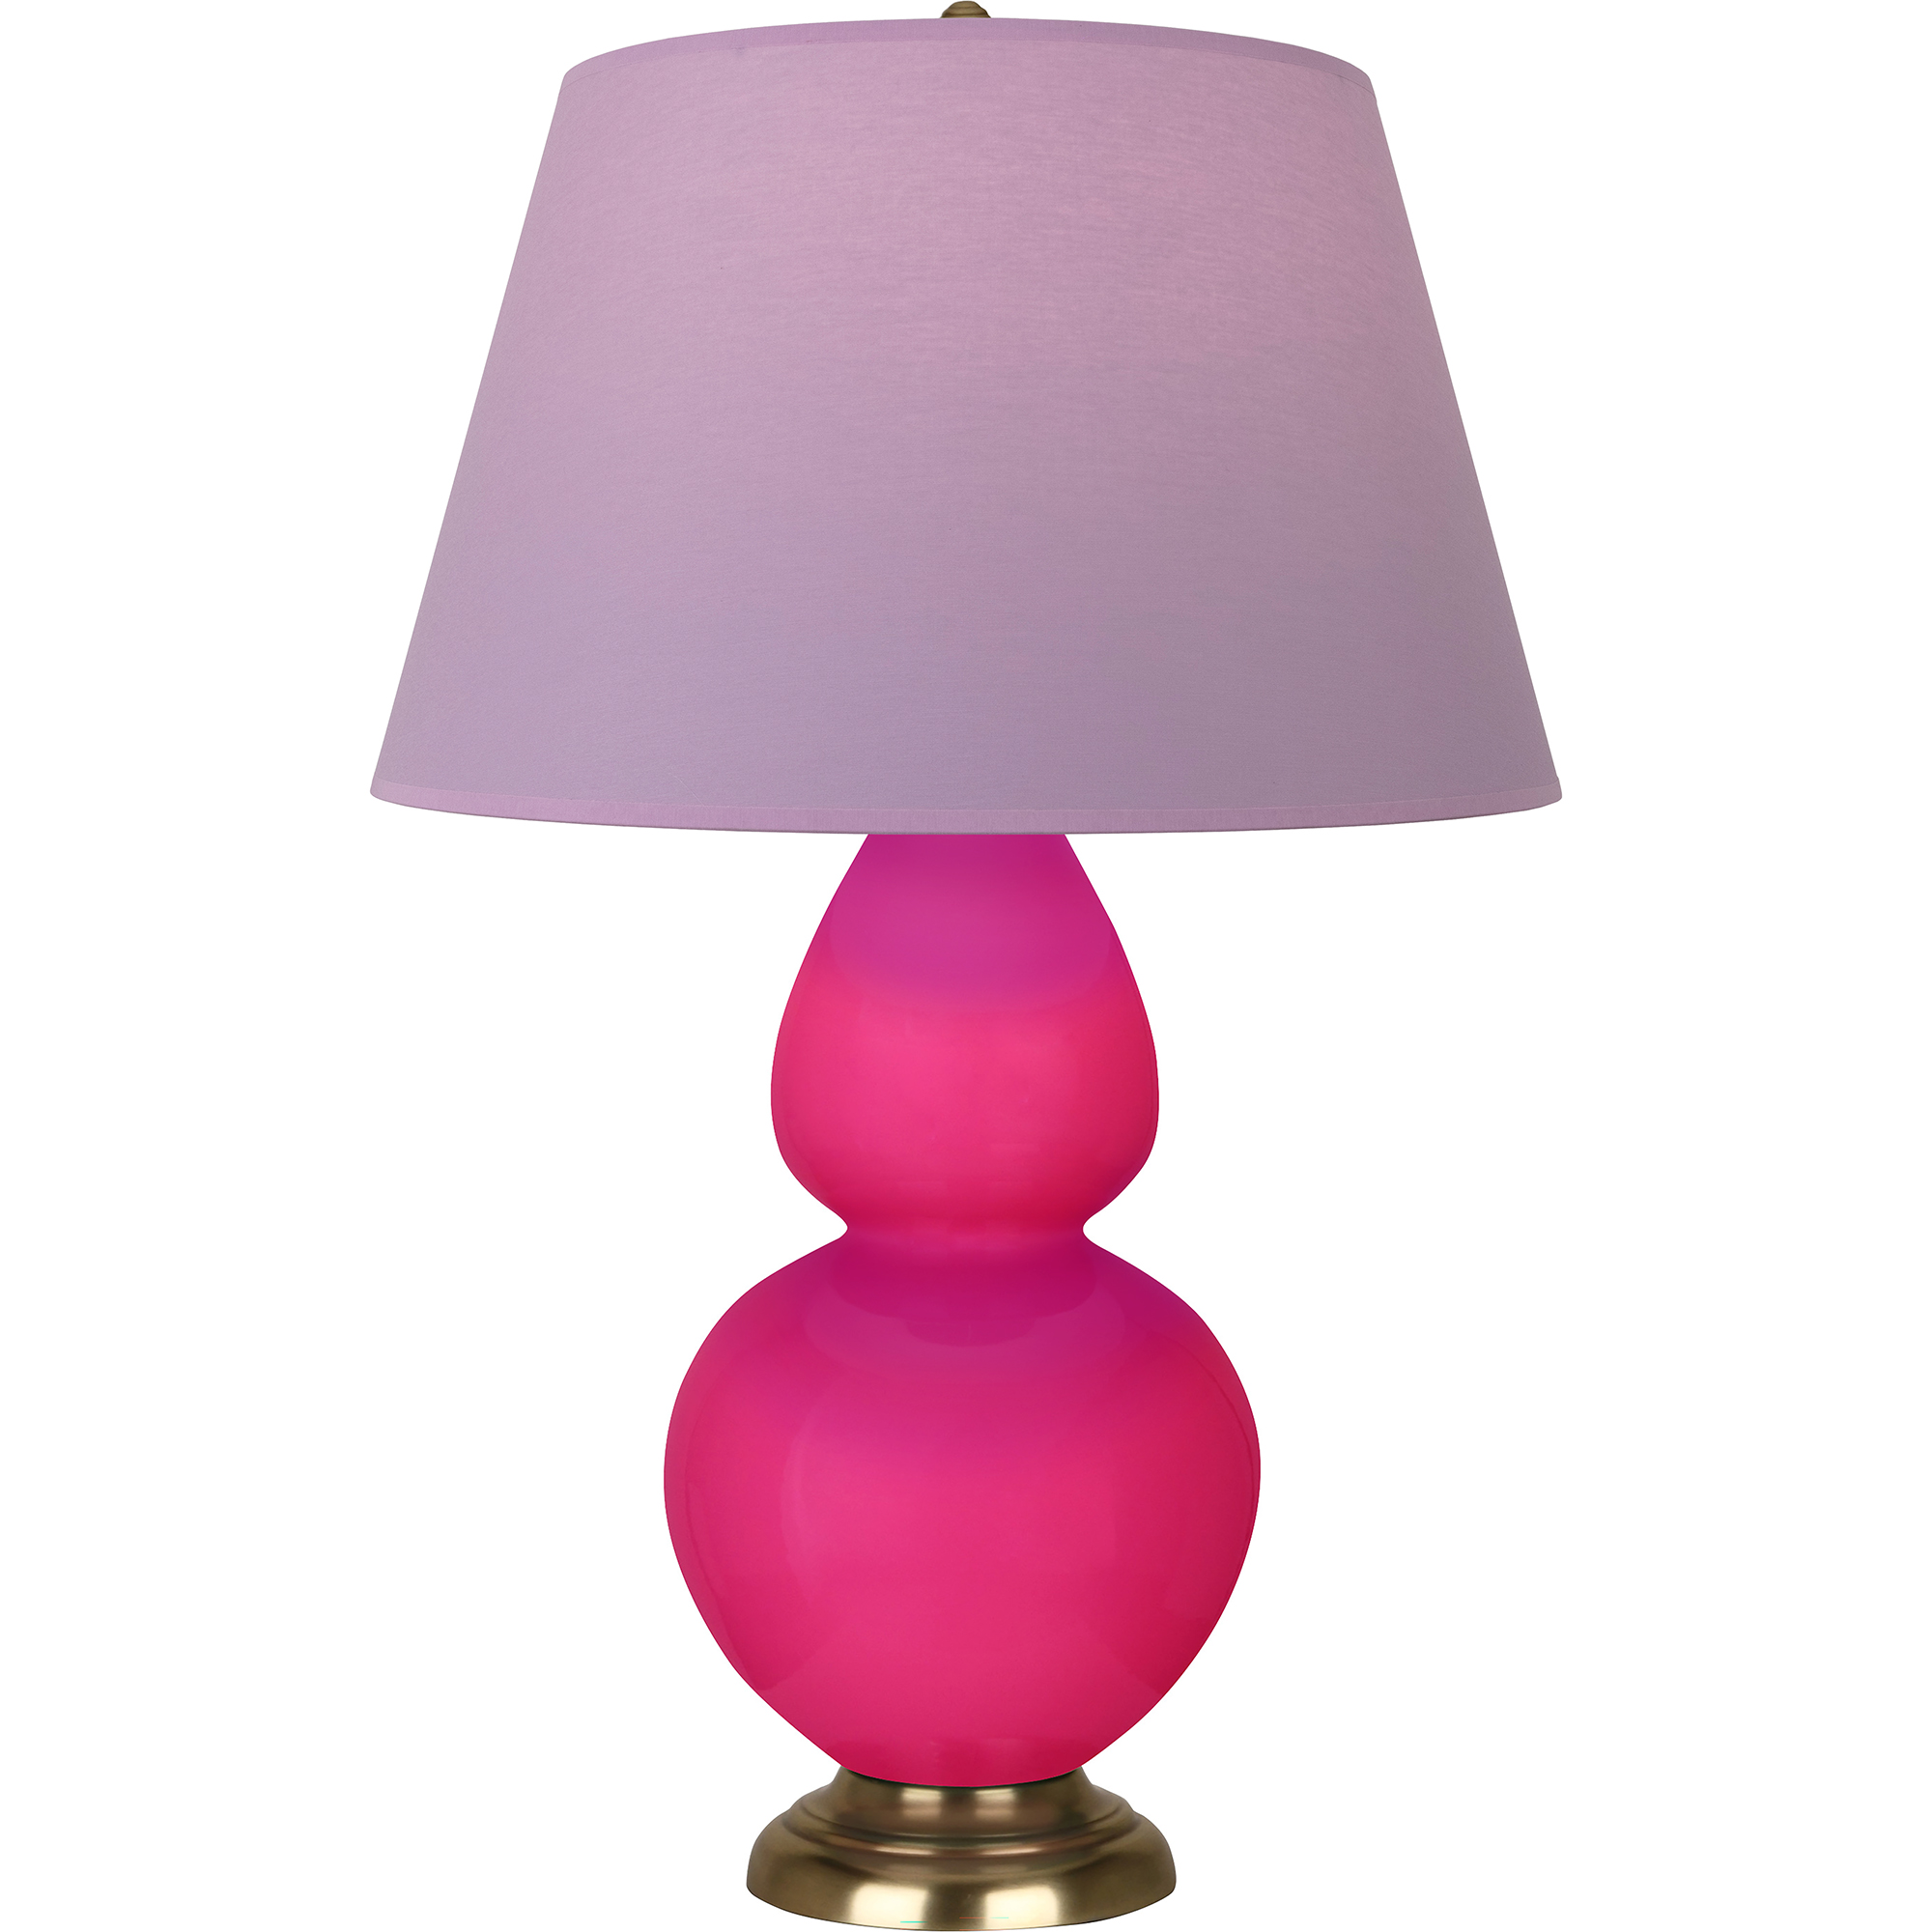 Double Gourd Table Lamp Style #RZ20L